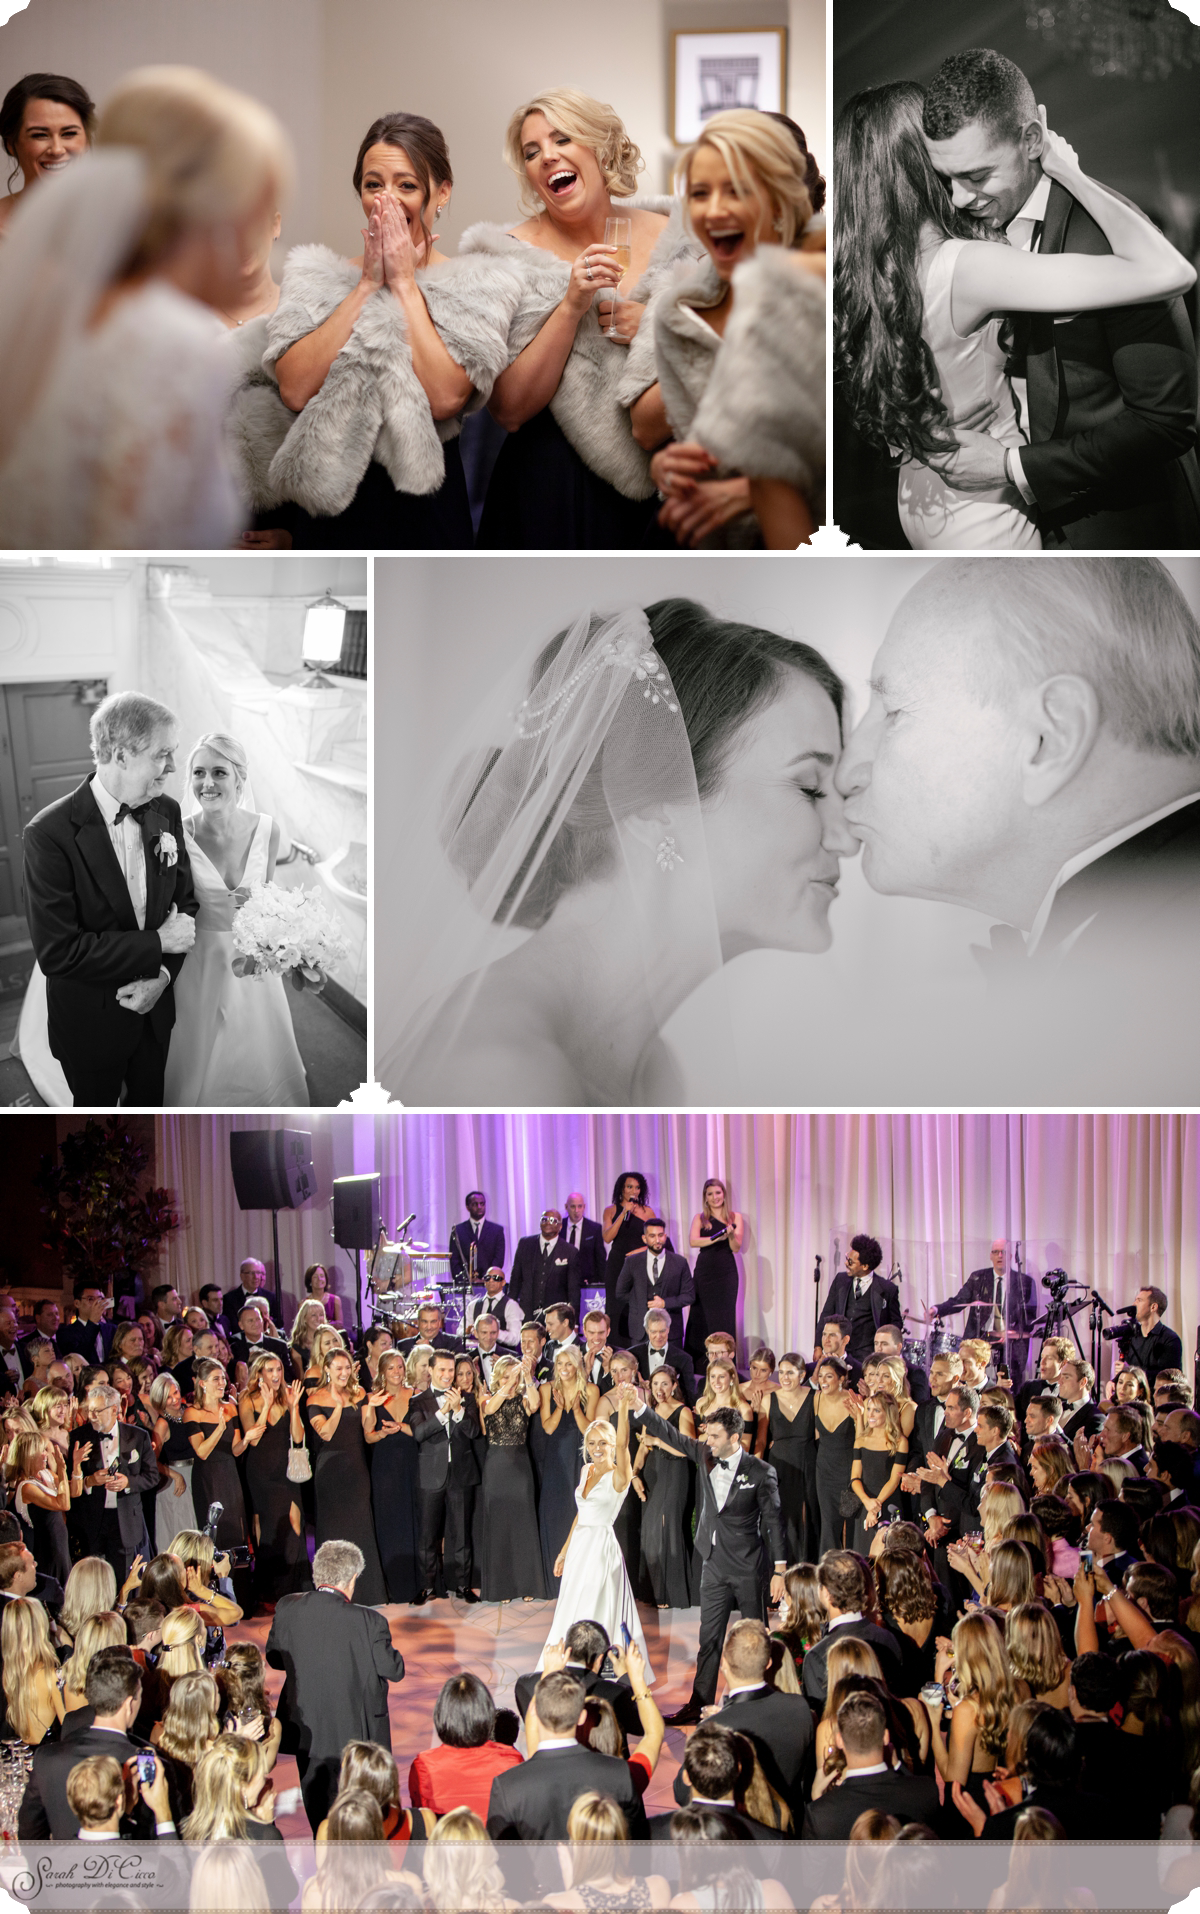 Wonderful Moments Sarah DiCicco Photography - Year in Review 2018